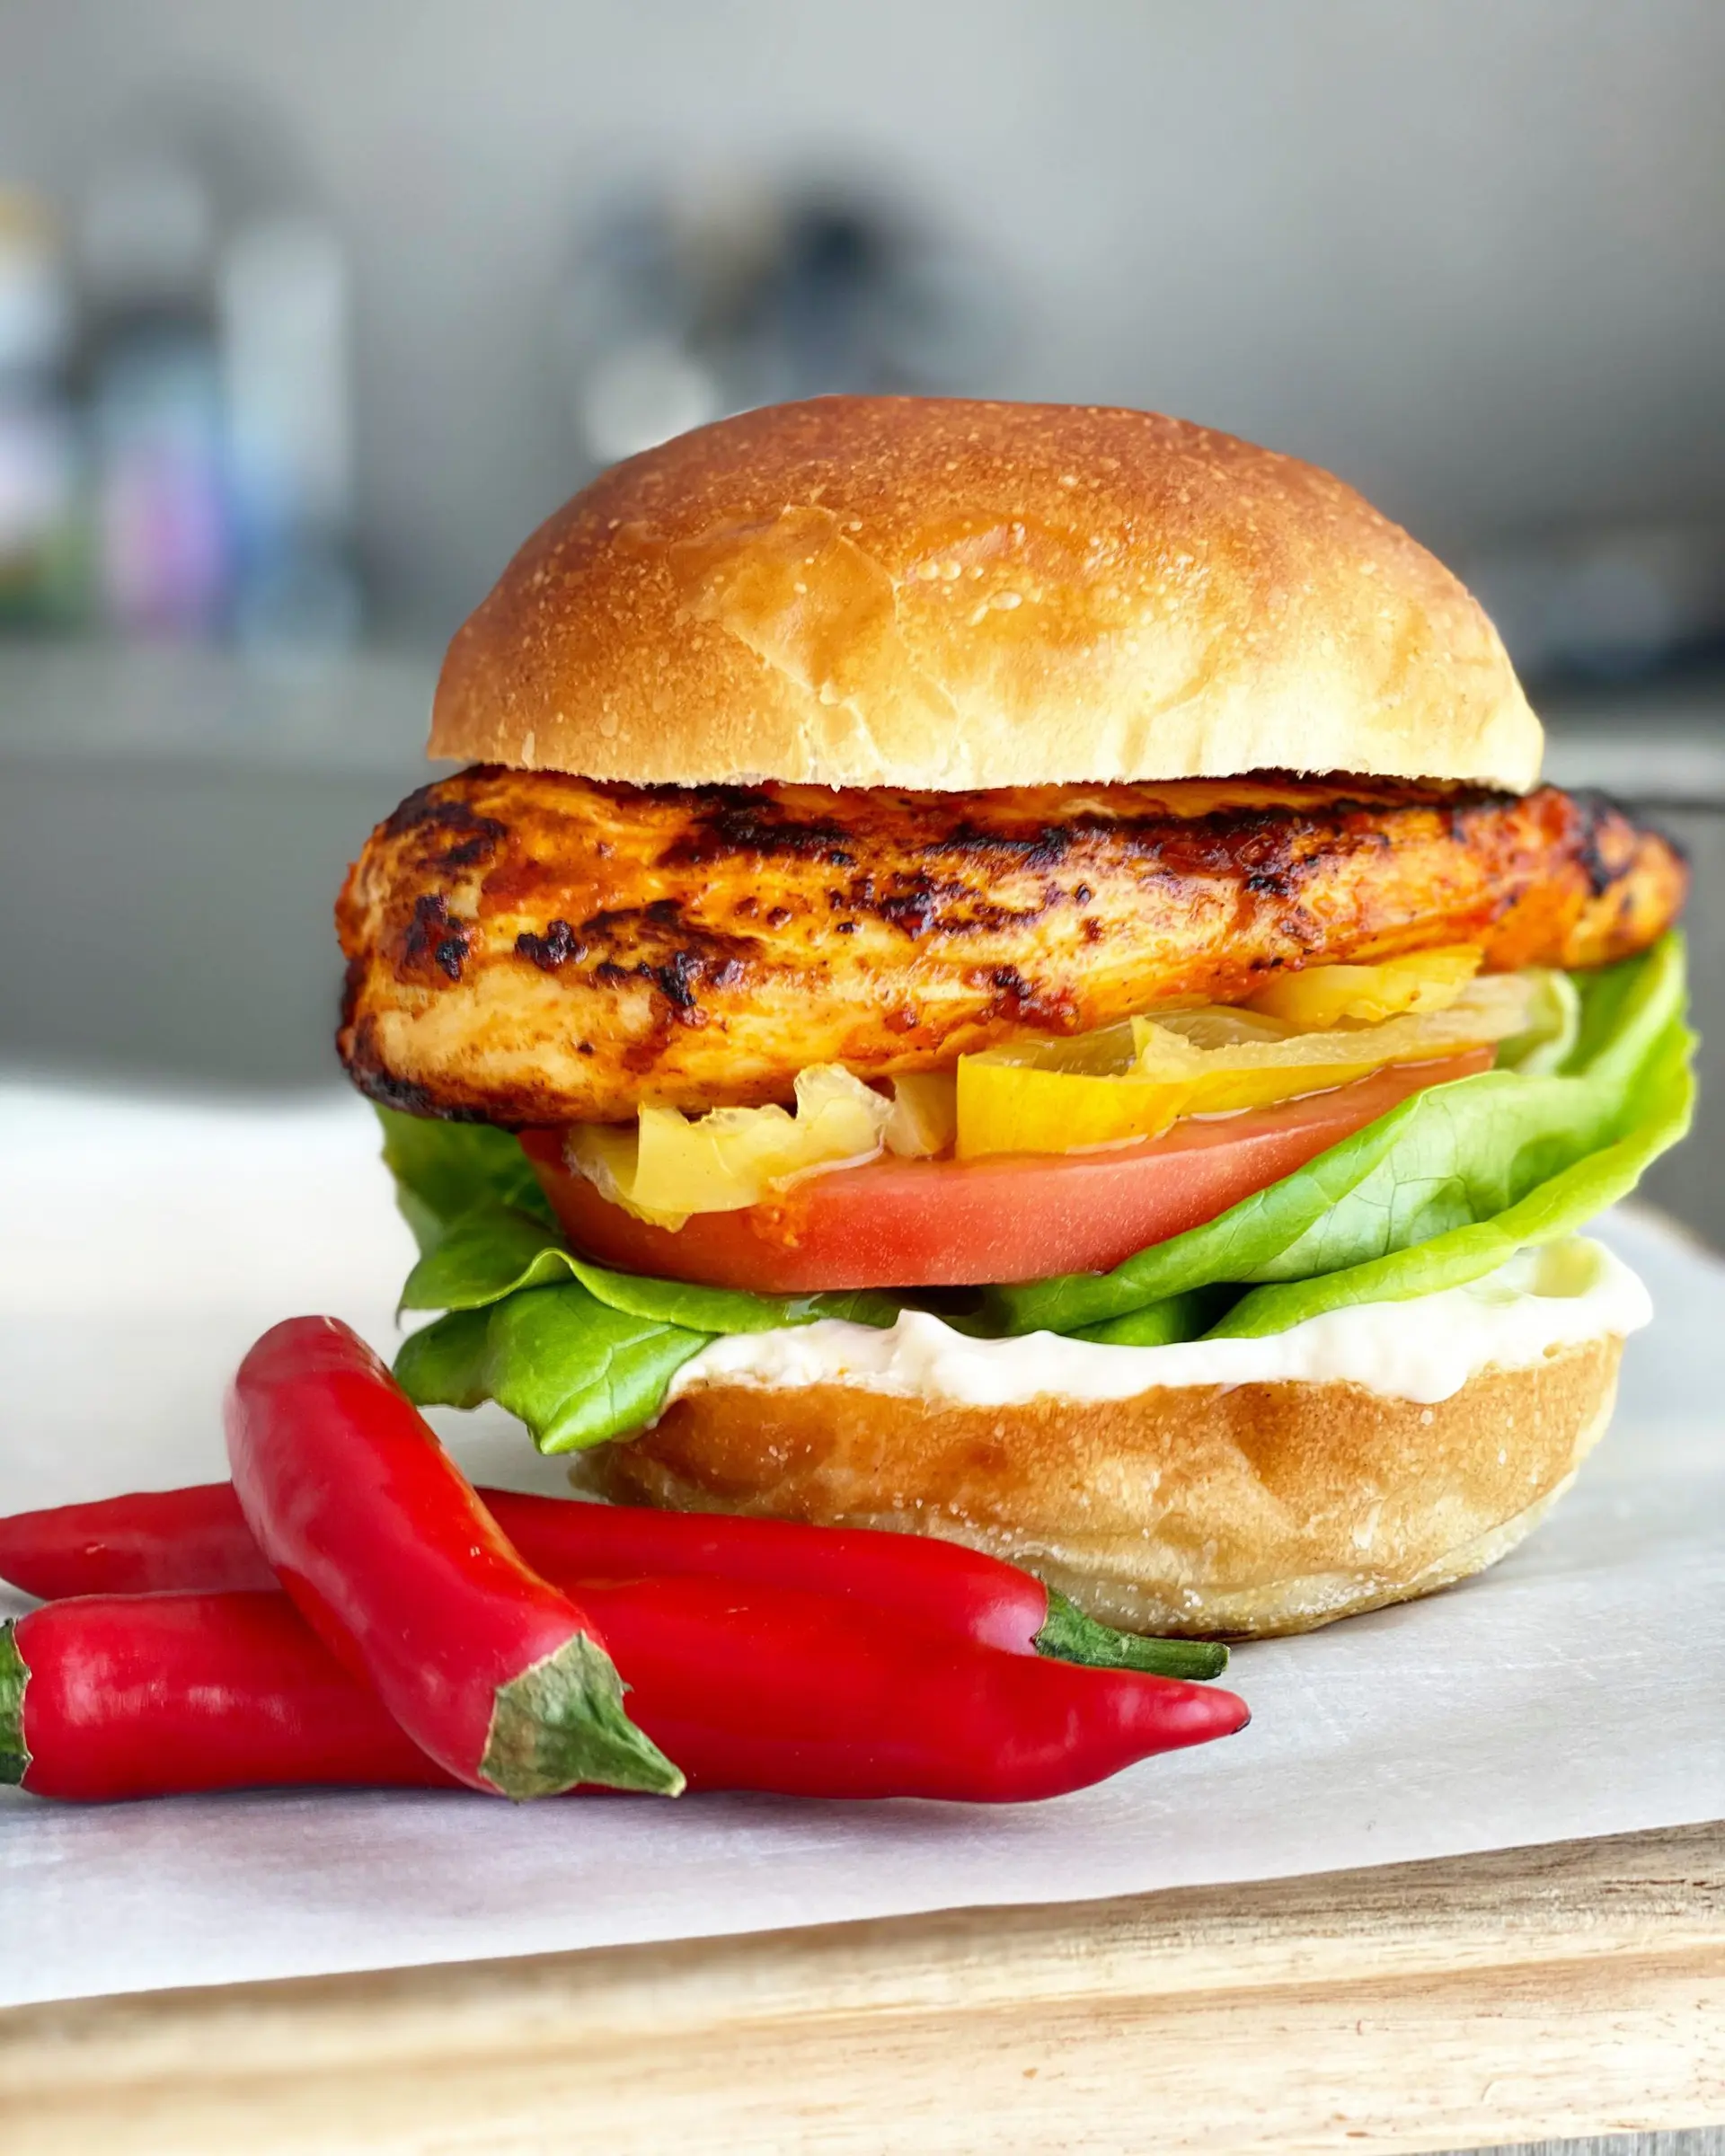 Peri peri burger with red peppers on the side.